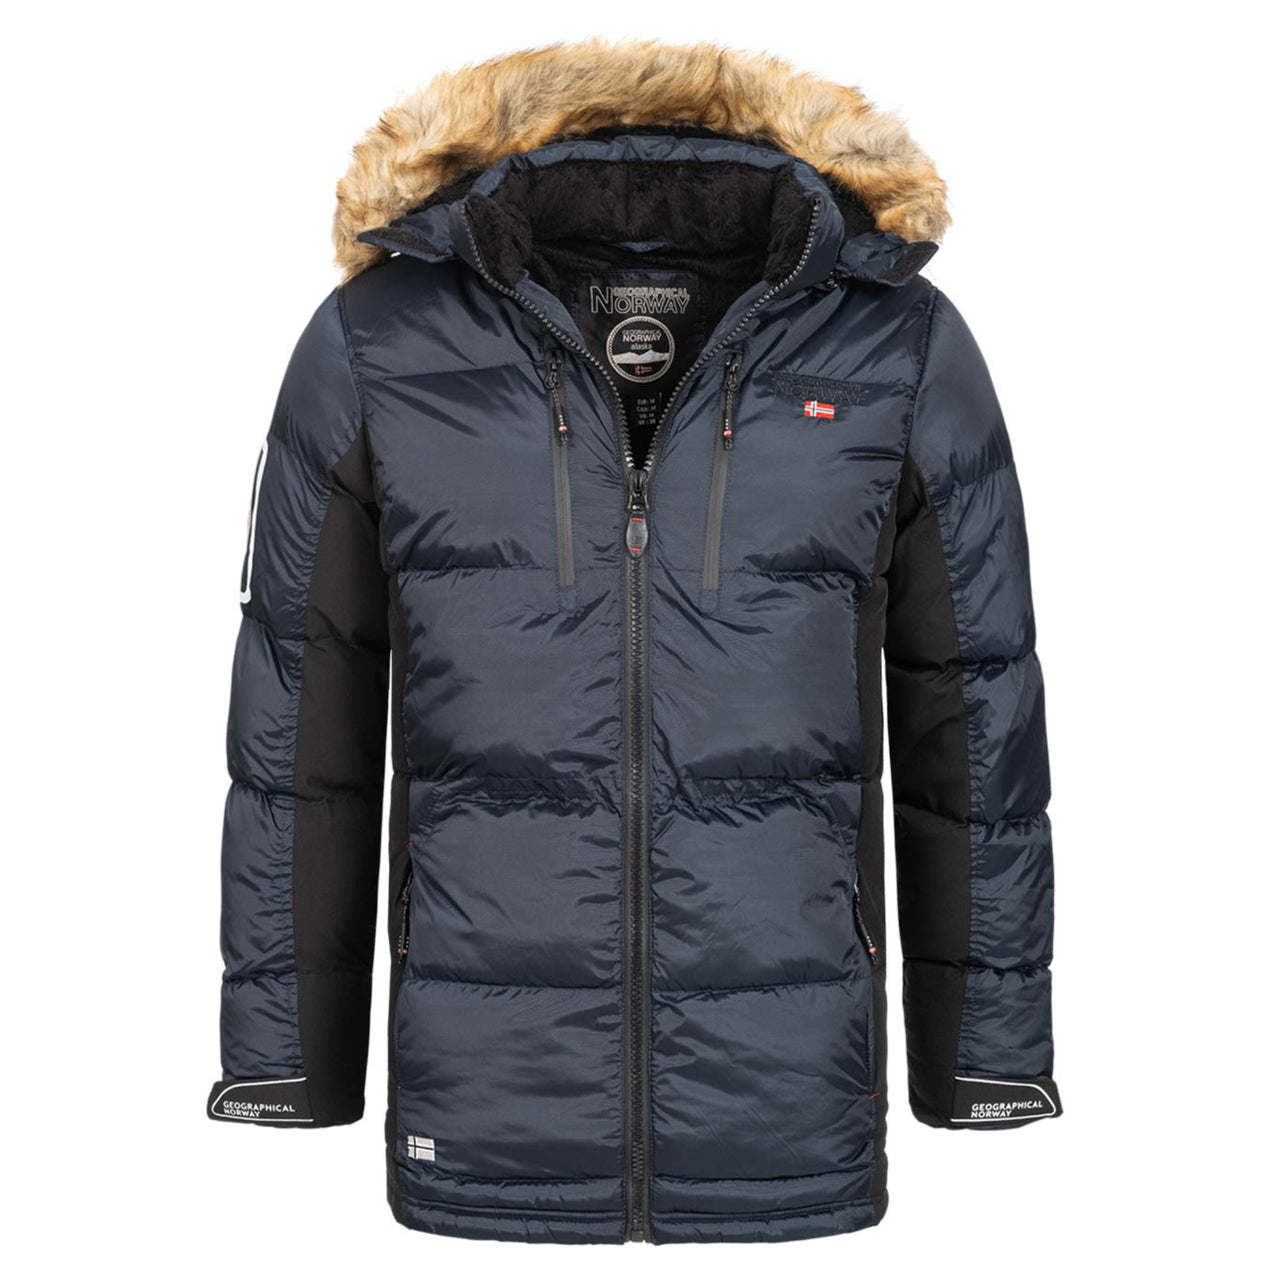 Geographical Norway Danone Homme - Men's bi- material parka with detachable  hood and adjustable synthetic faux fur Navy